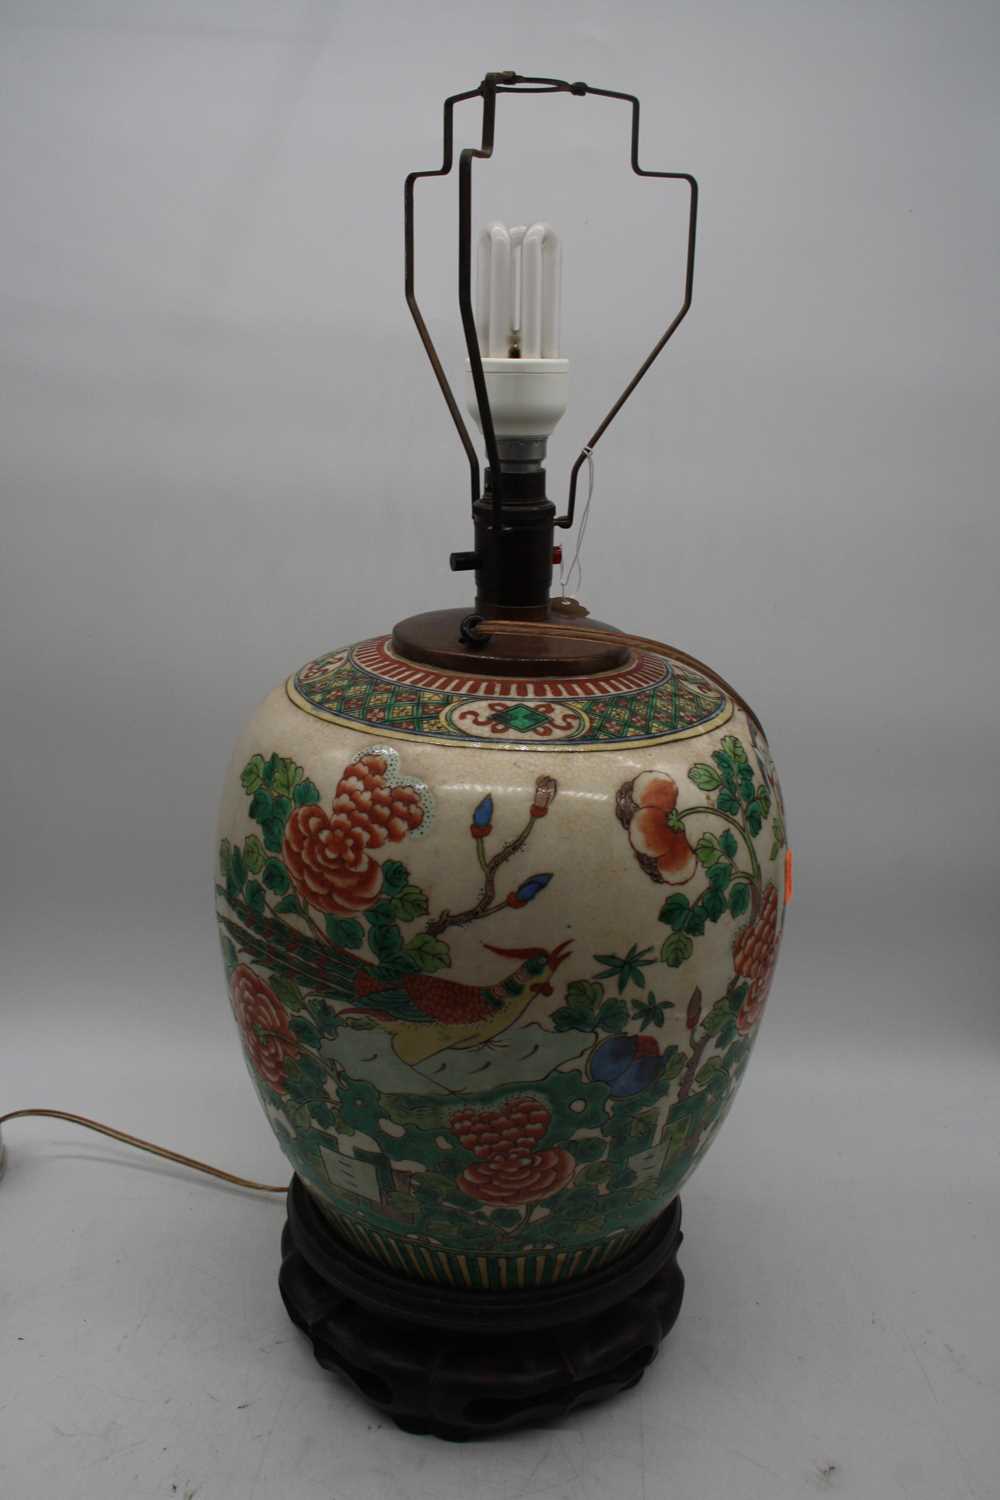 A Chinese export porcelain jar, later converted to a table lamp, enamel decorated with birds amongst - Image 2 of 5